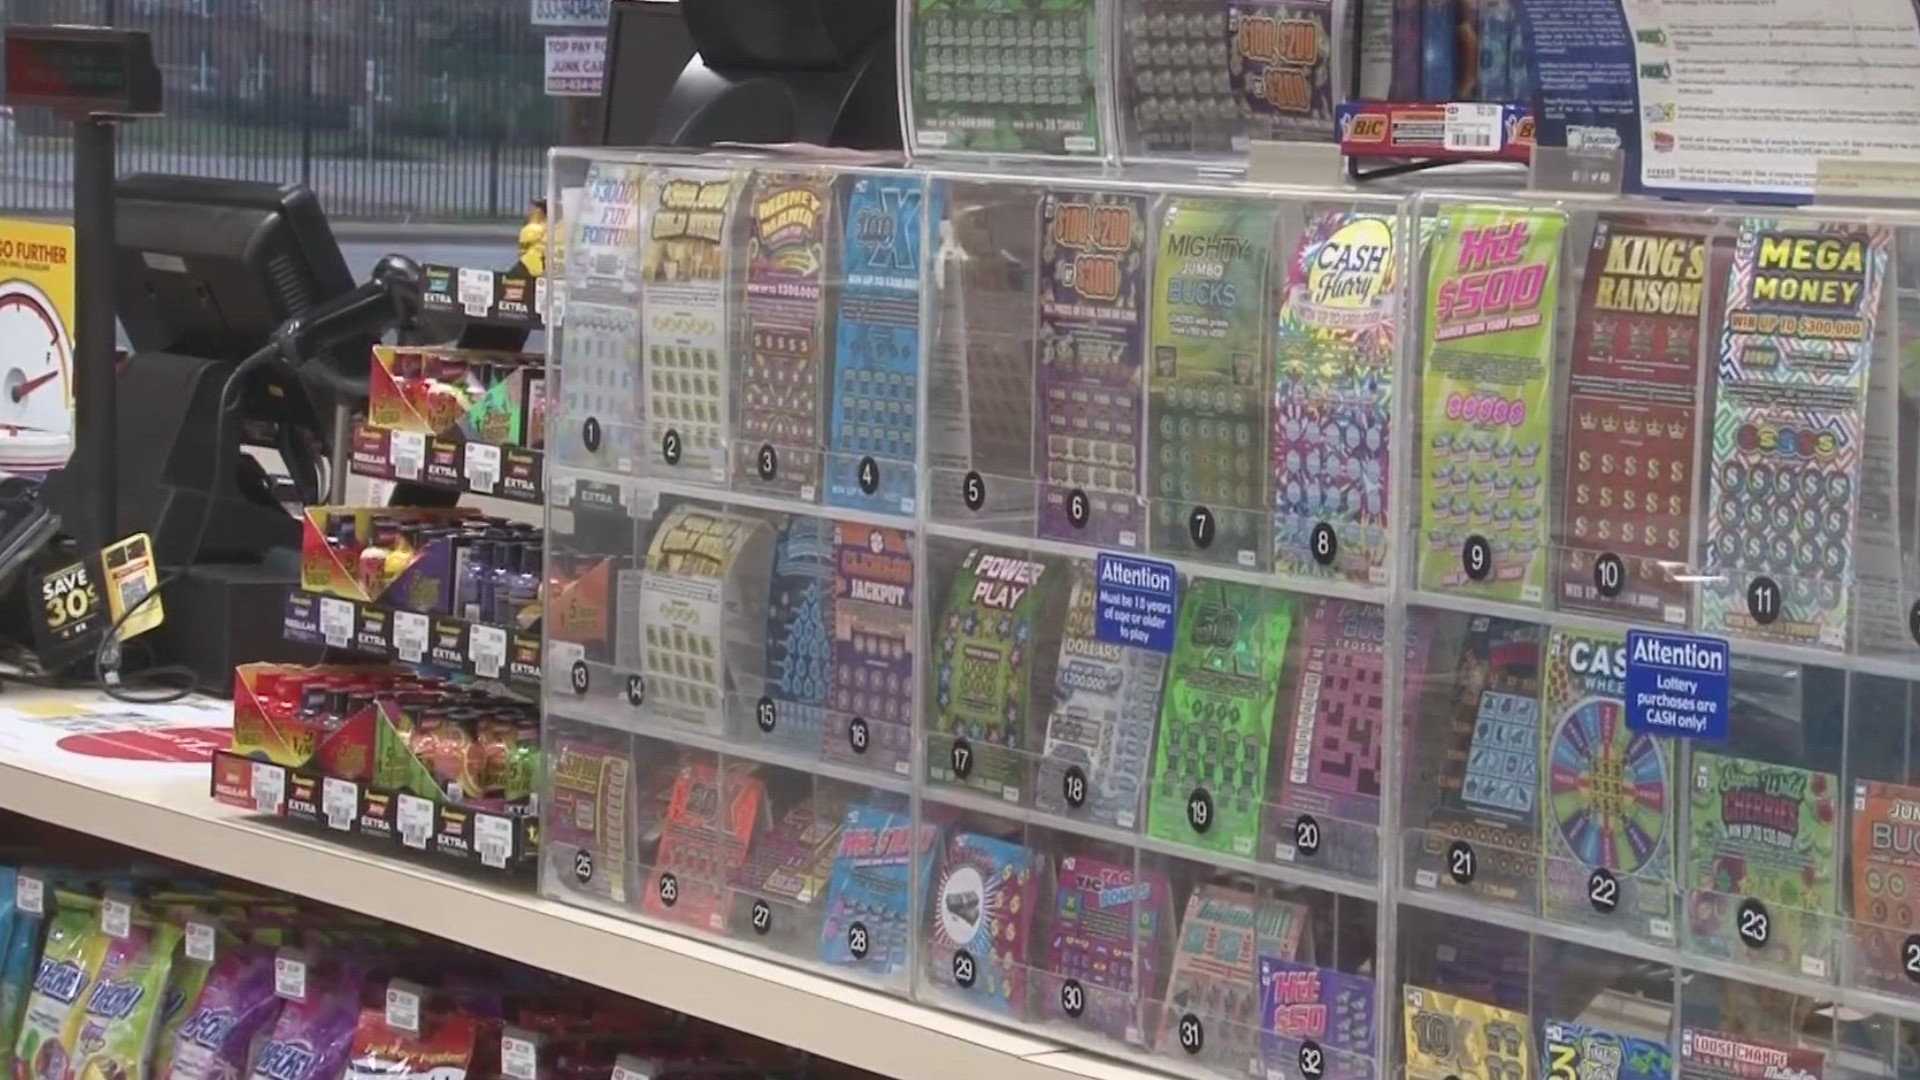 The bill would let people buy lottery tickets with a debit card, instead of cash, which is currently required to play in South Carolina.